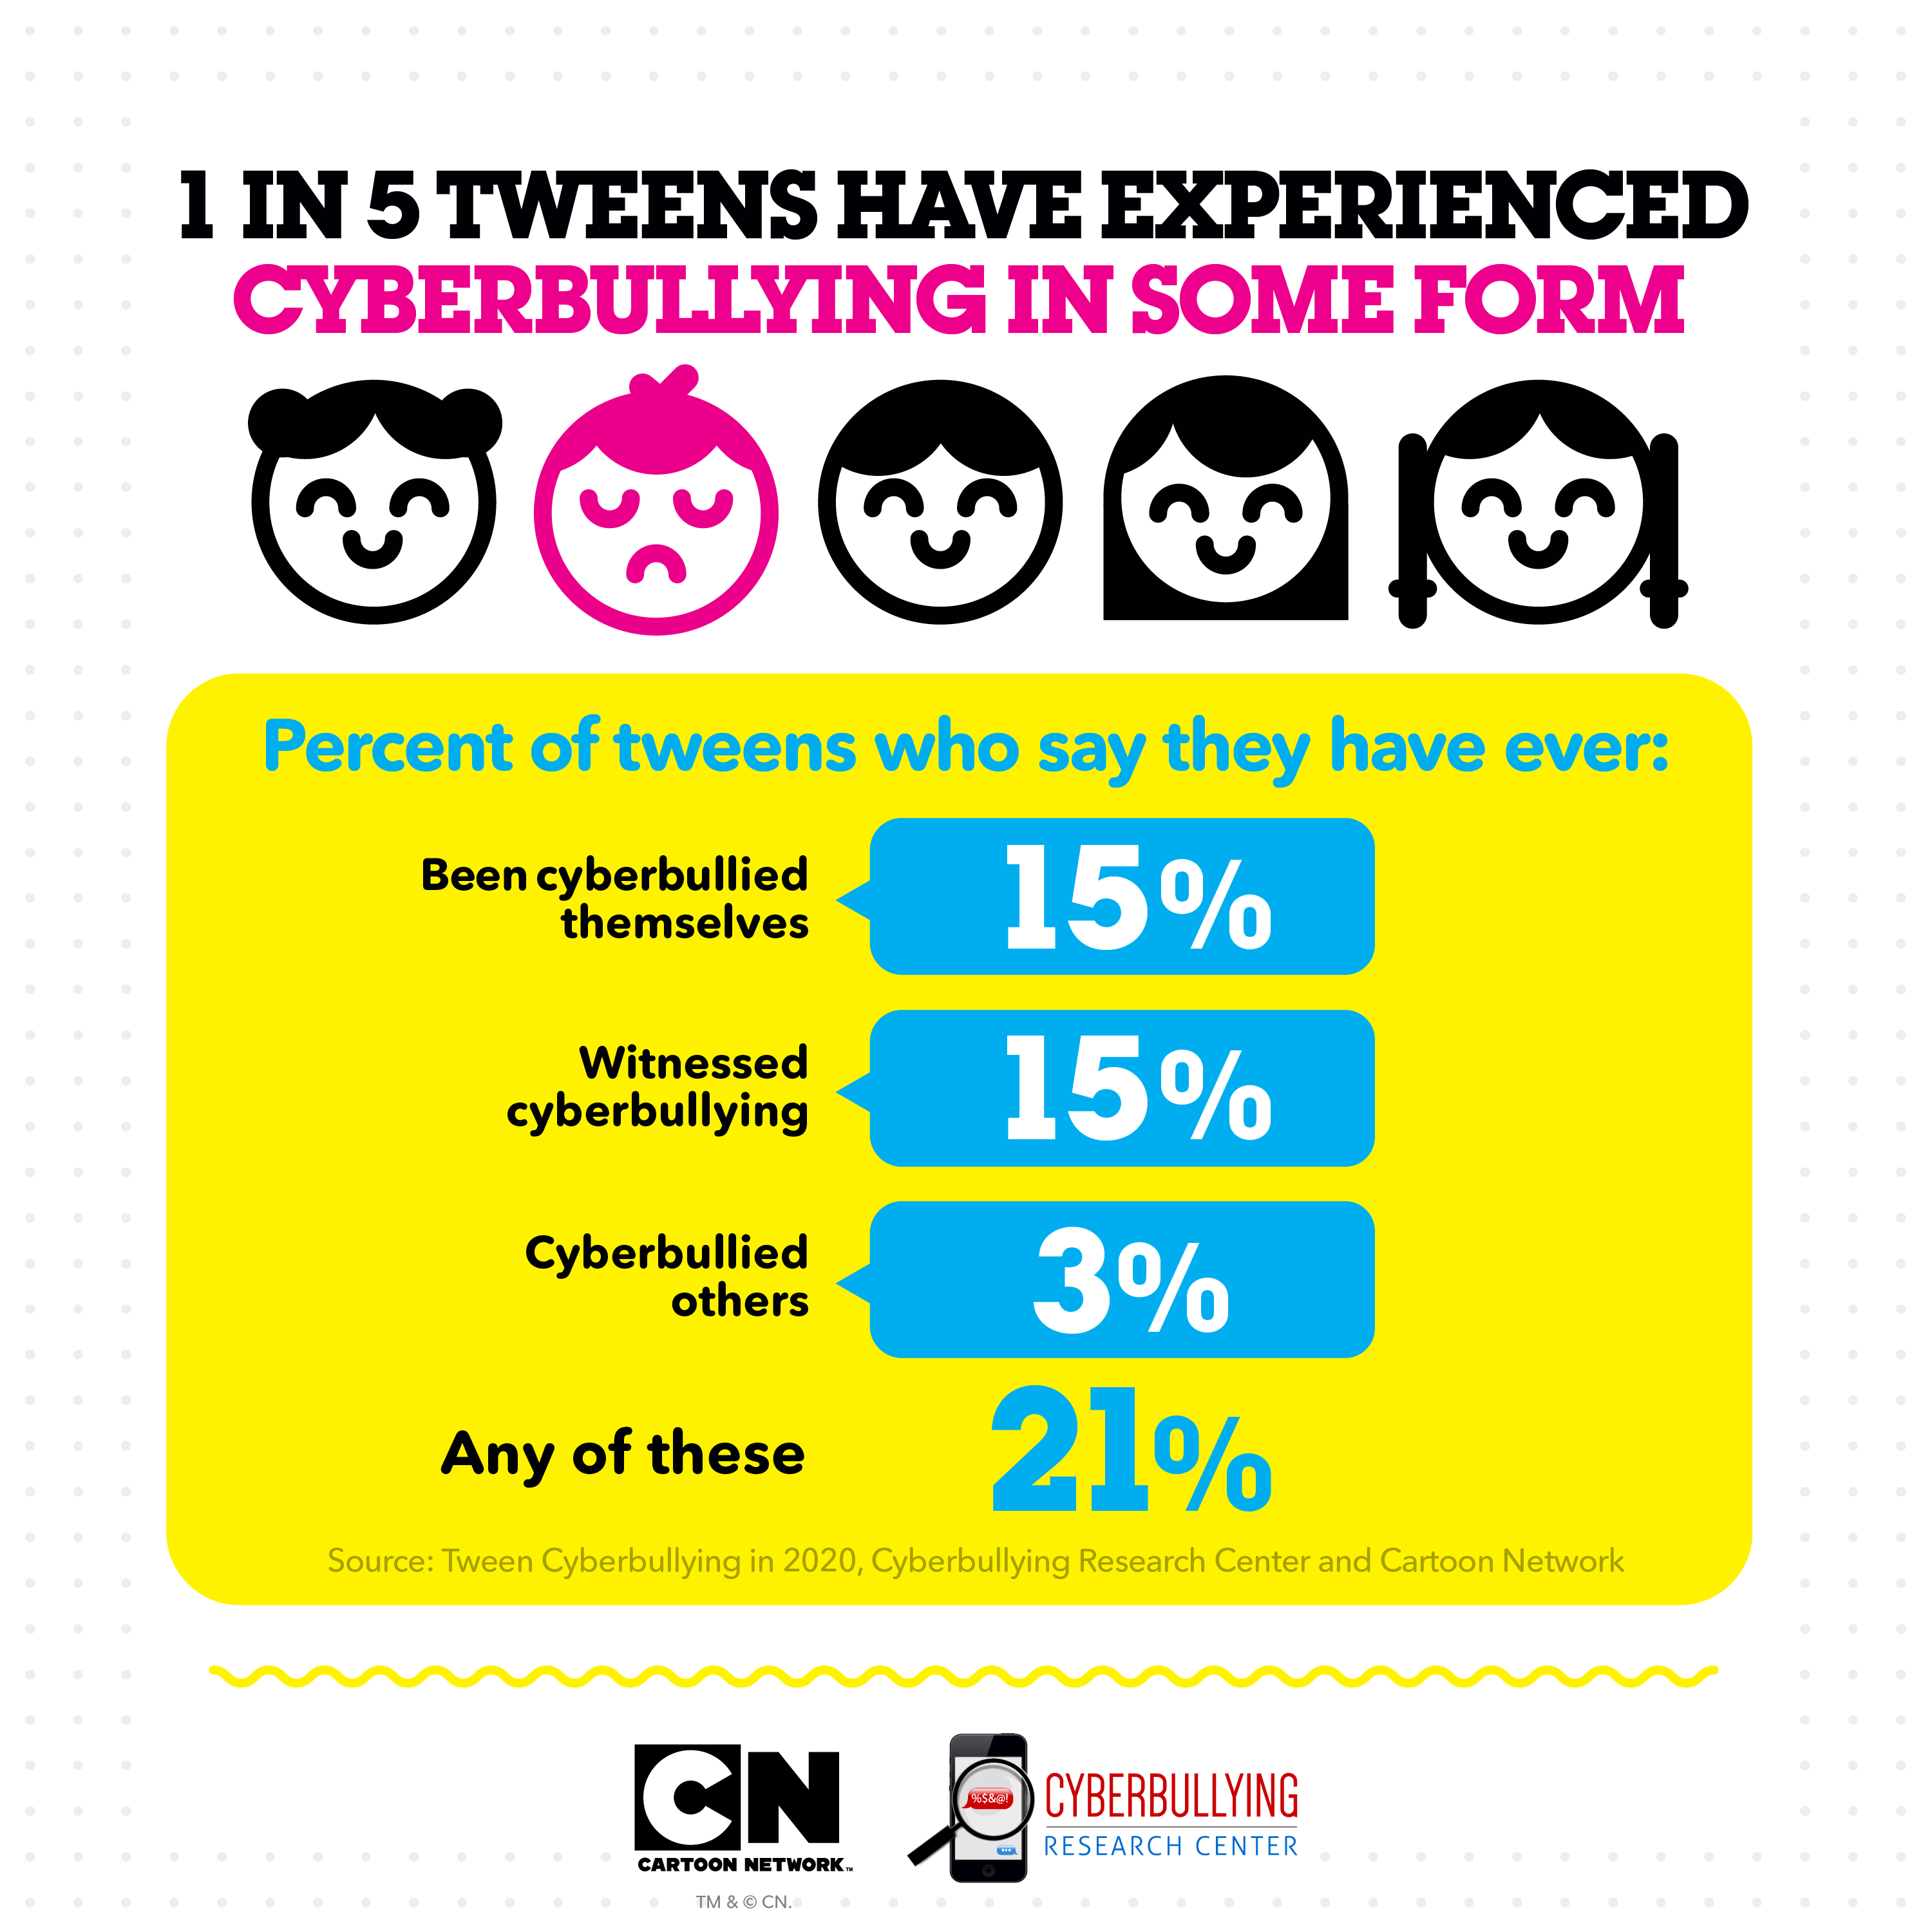 Bullying statistics from Cyberbullying Research Center and Cartoon Network